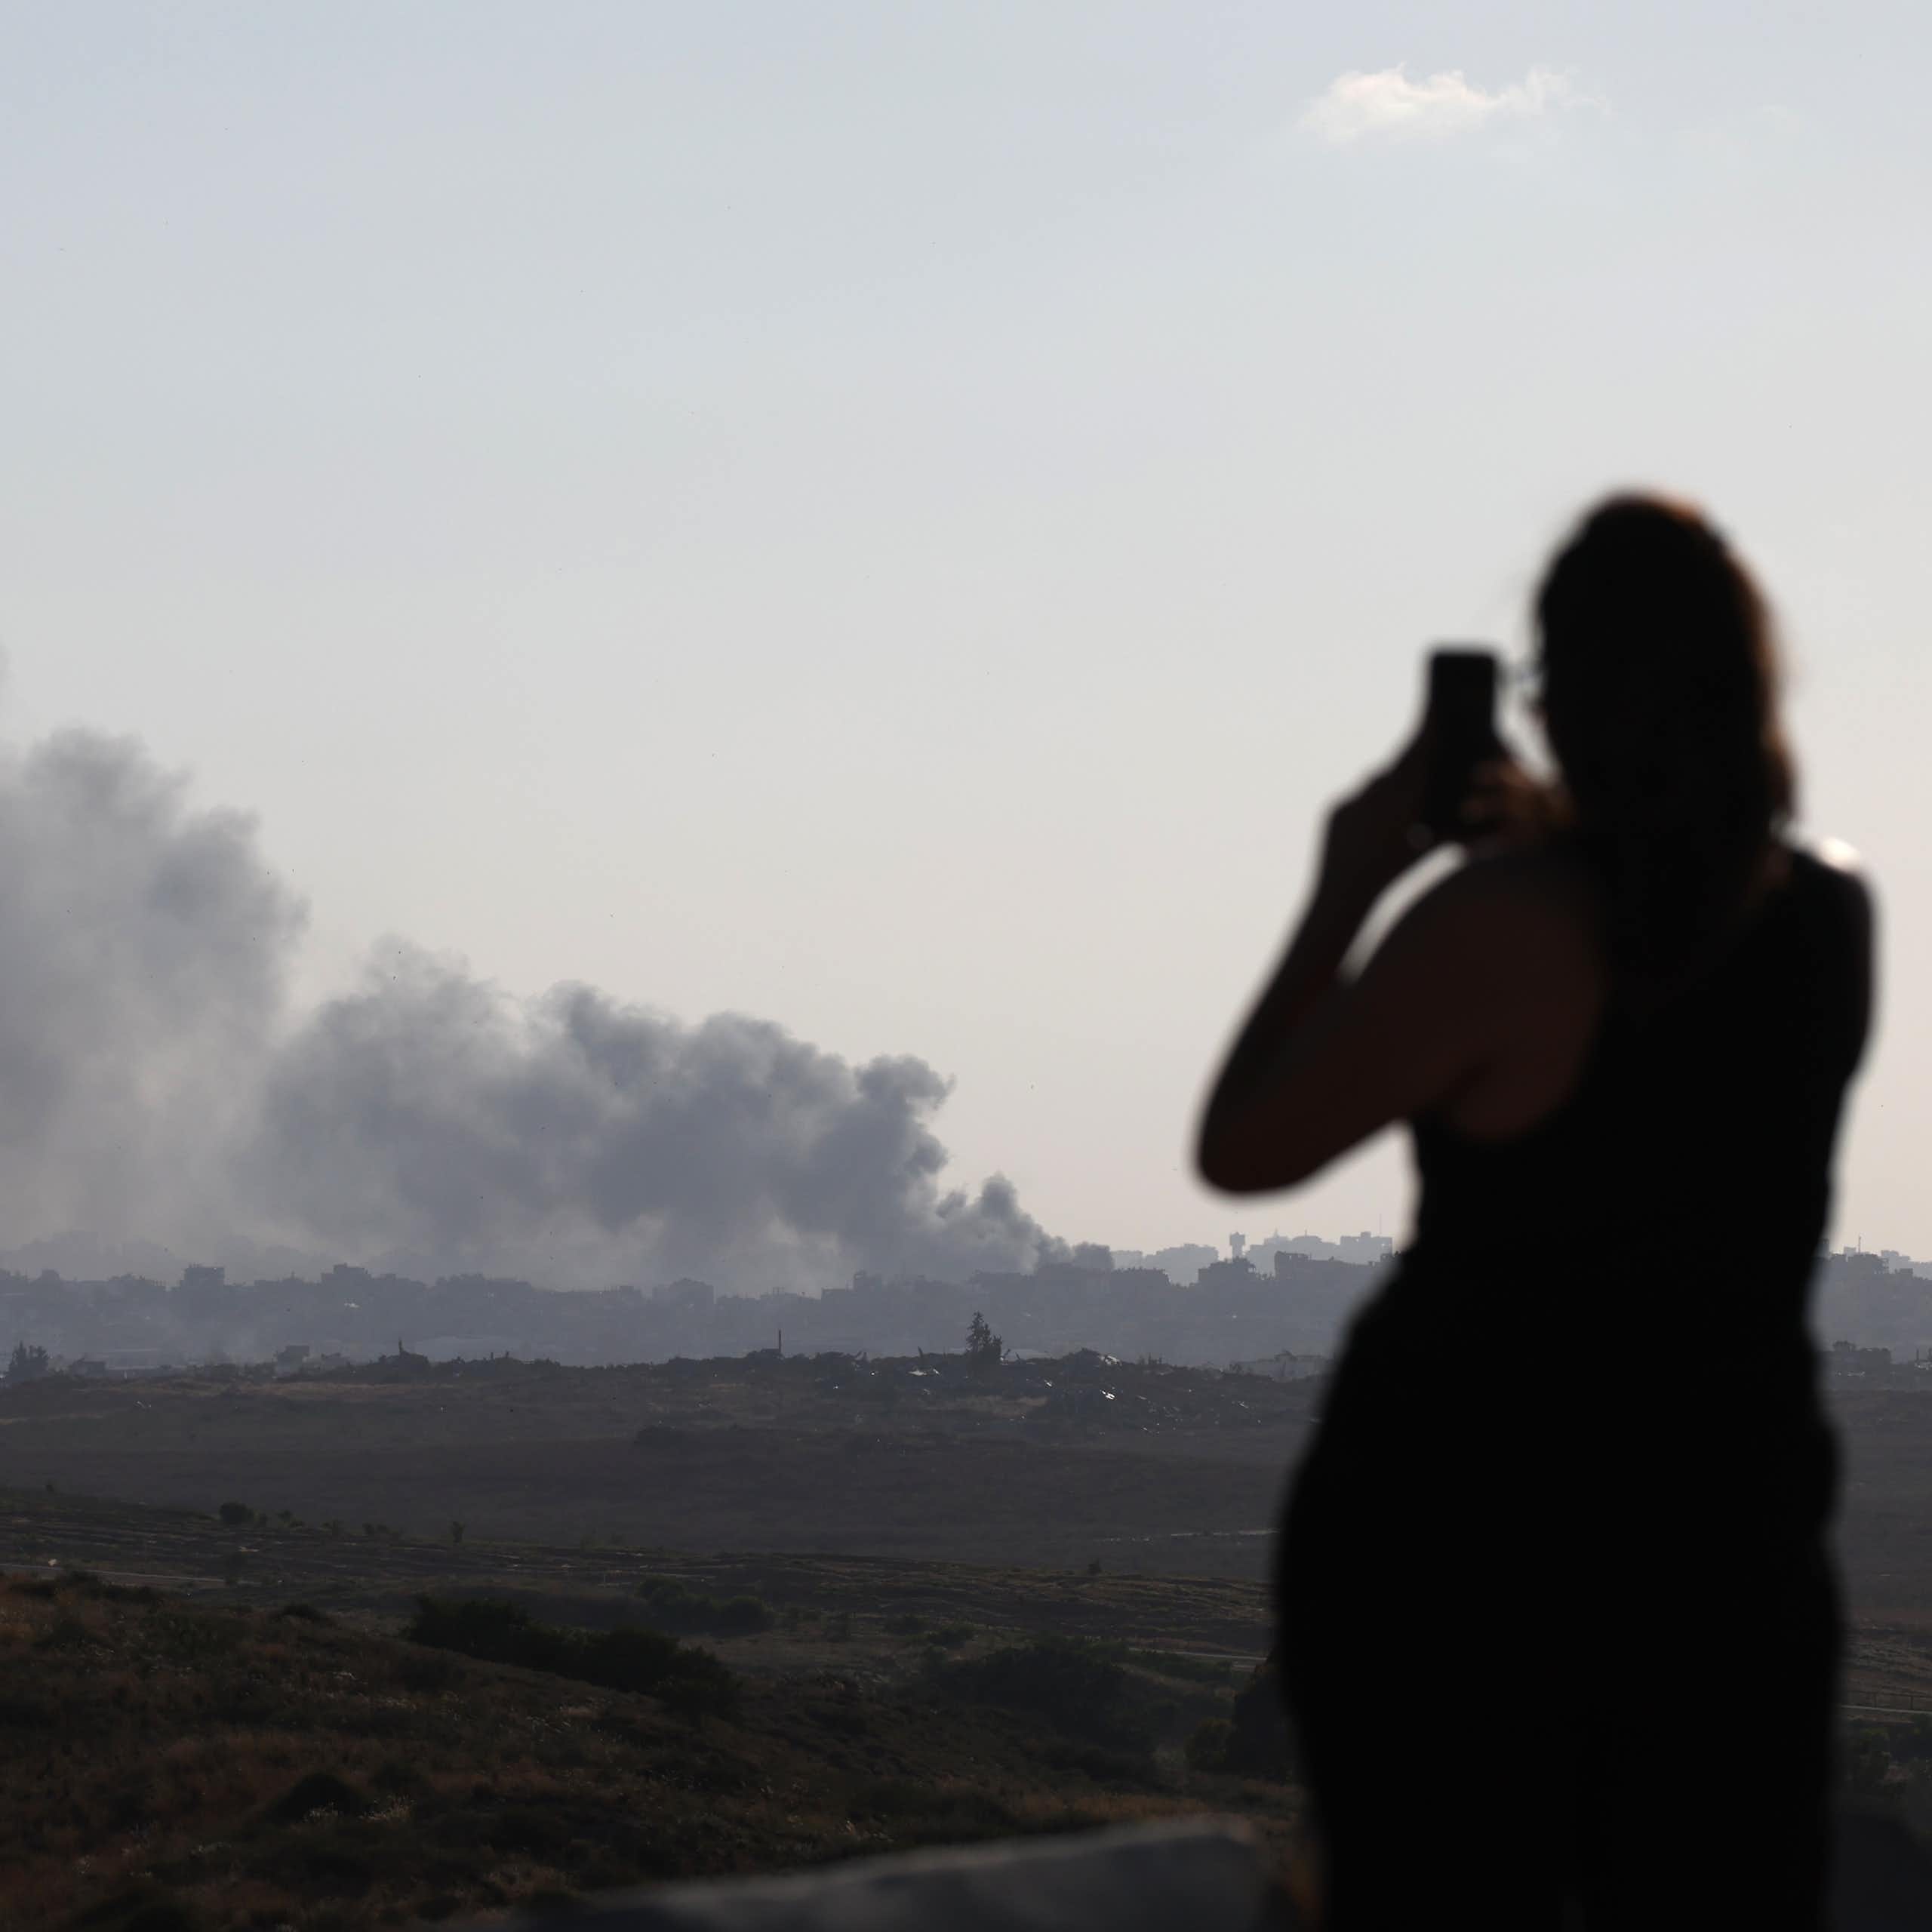 A woman looking at a large plume of smoke and filming with her phone.